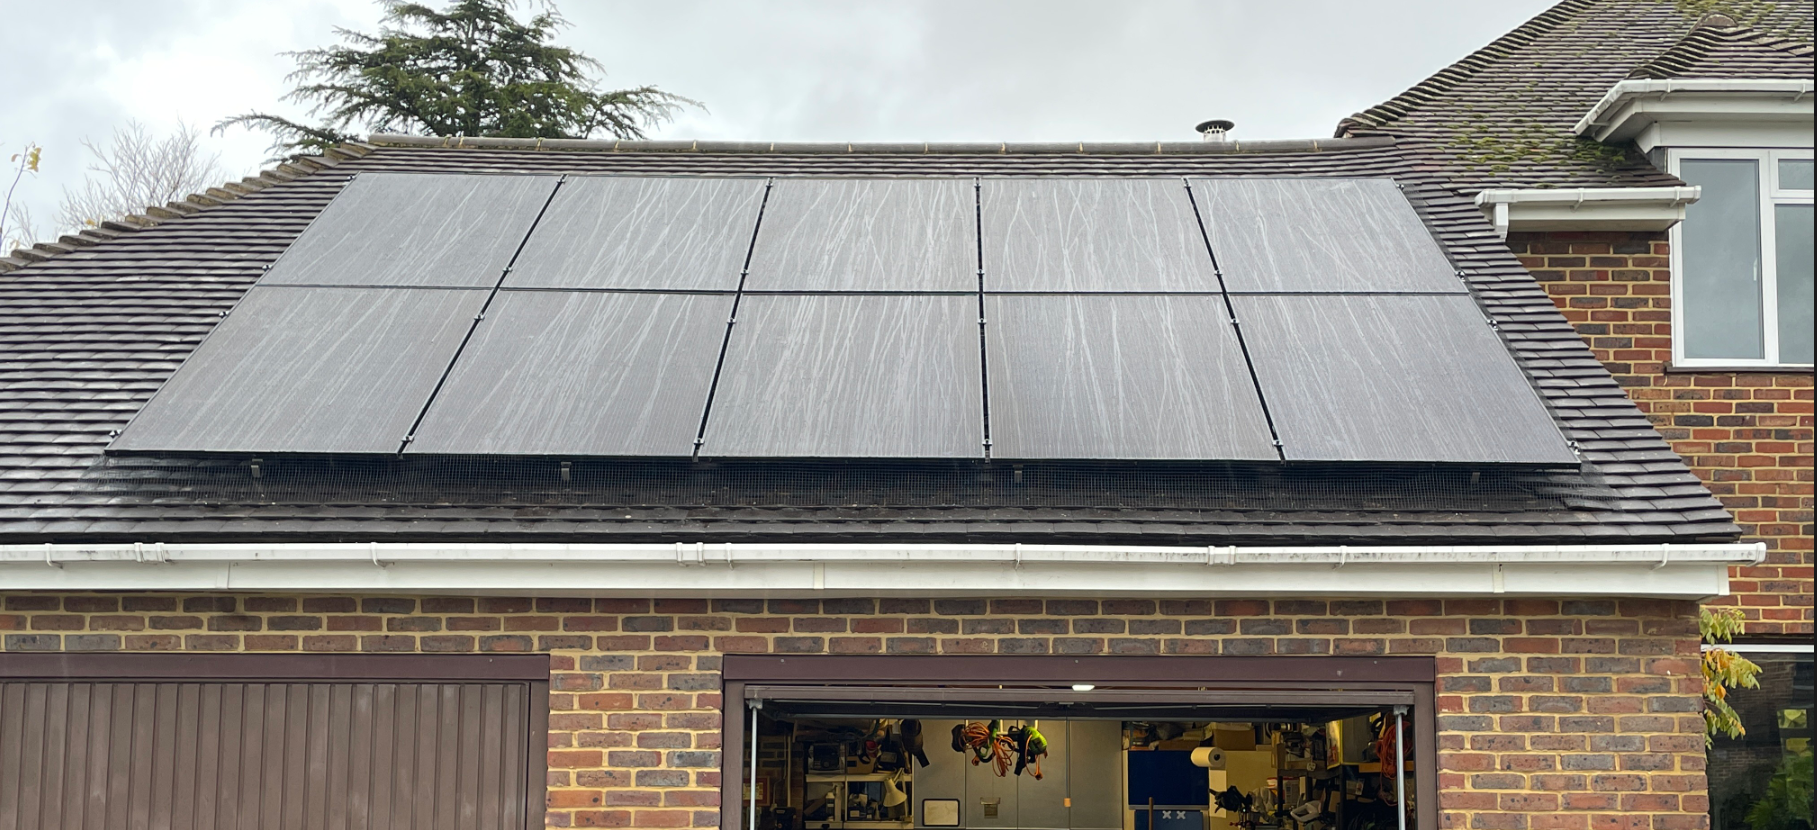 Are Solar Panels Self Cleaning?